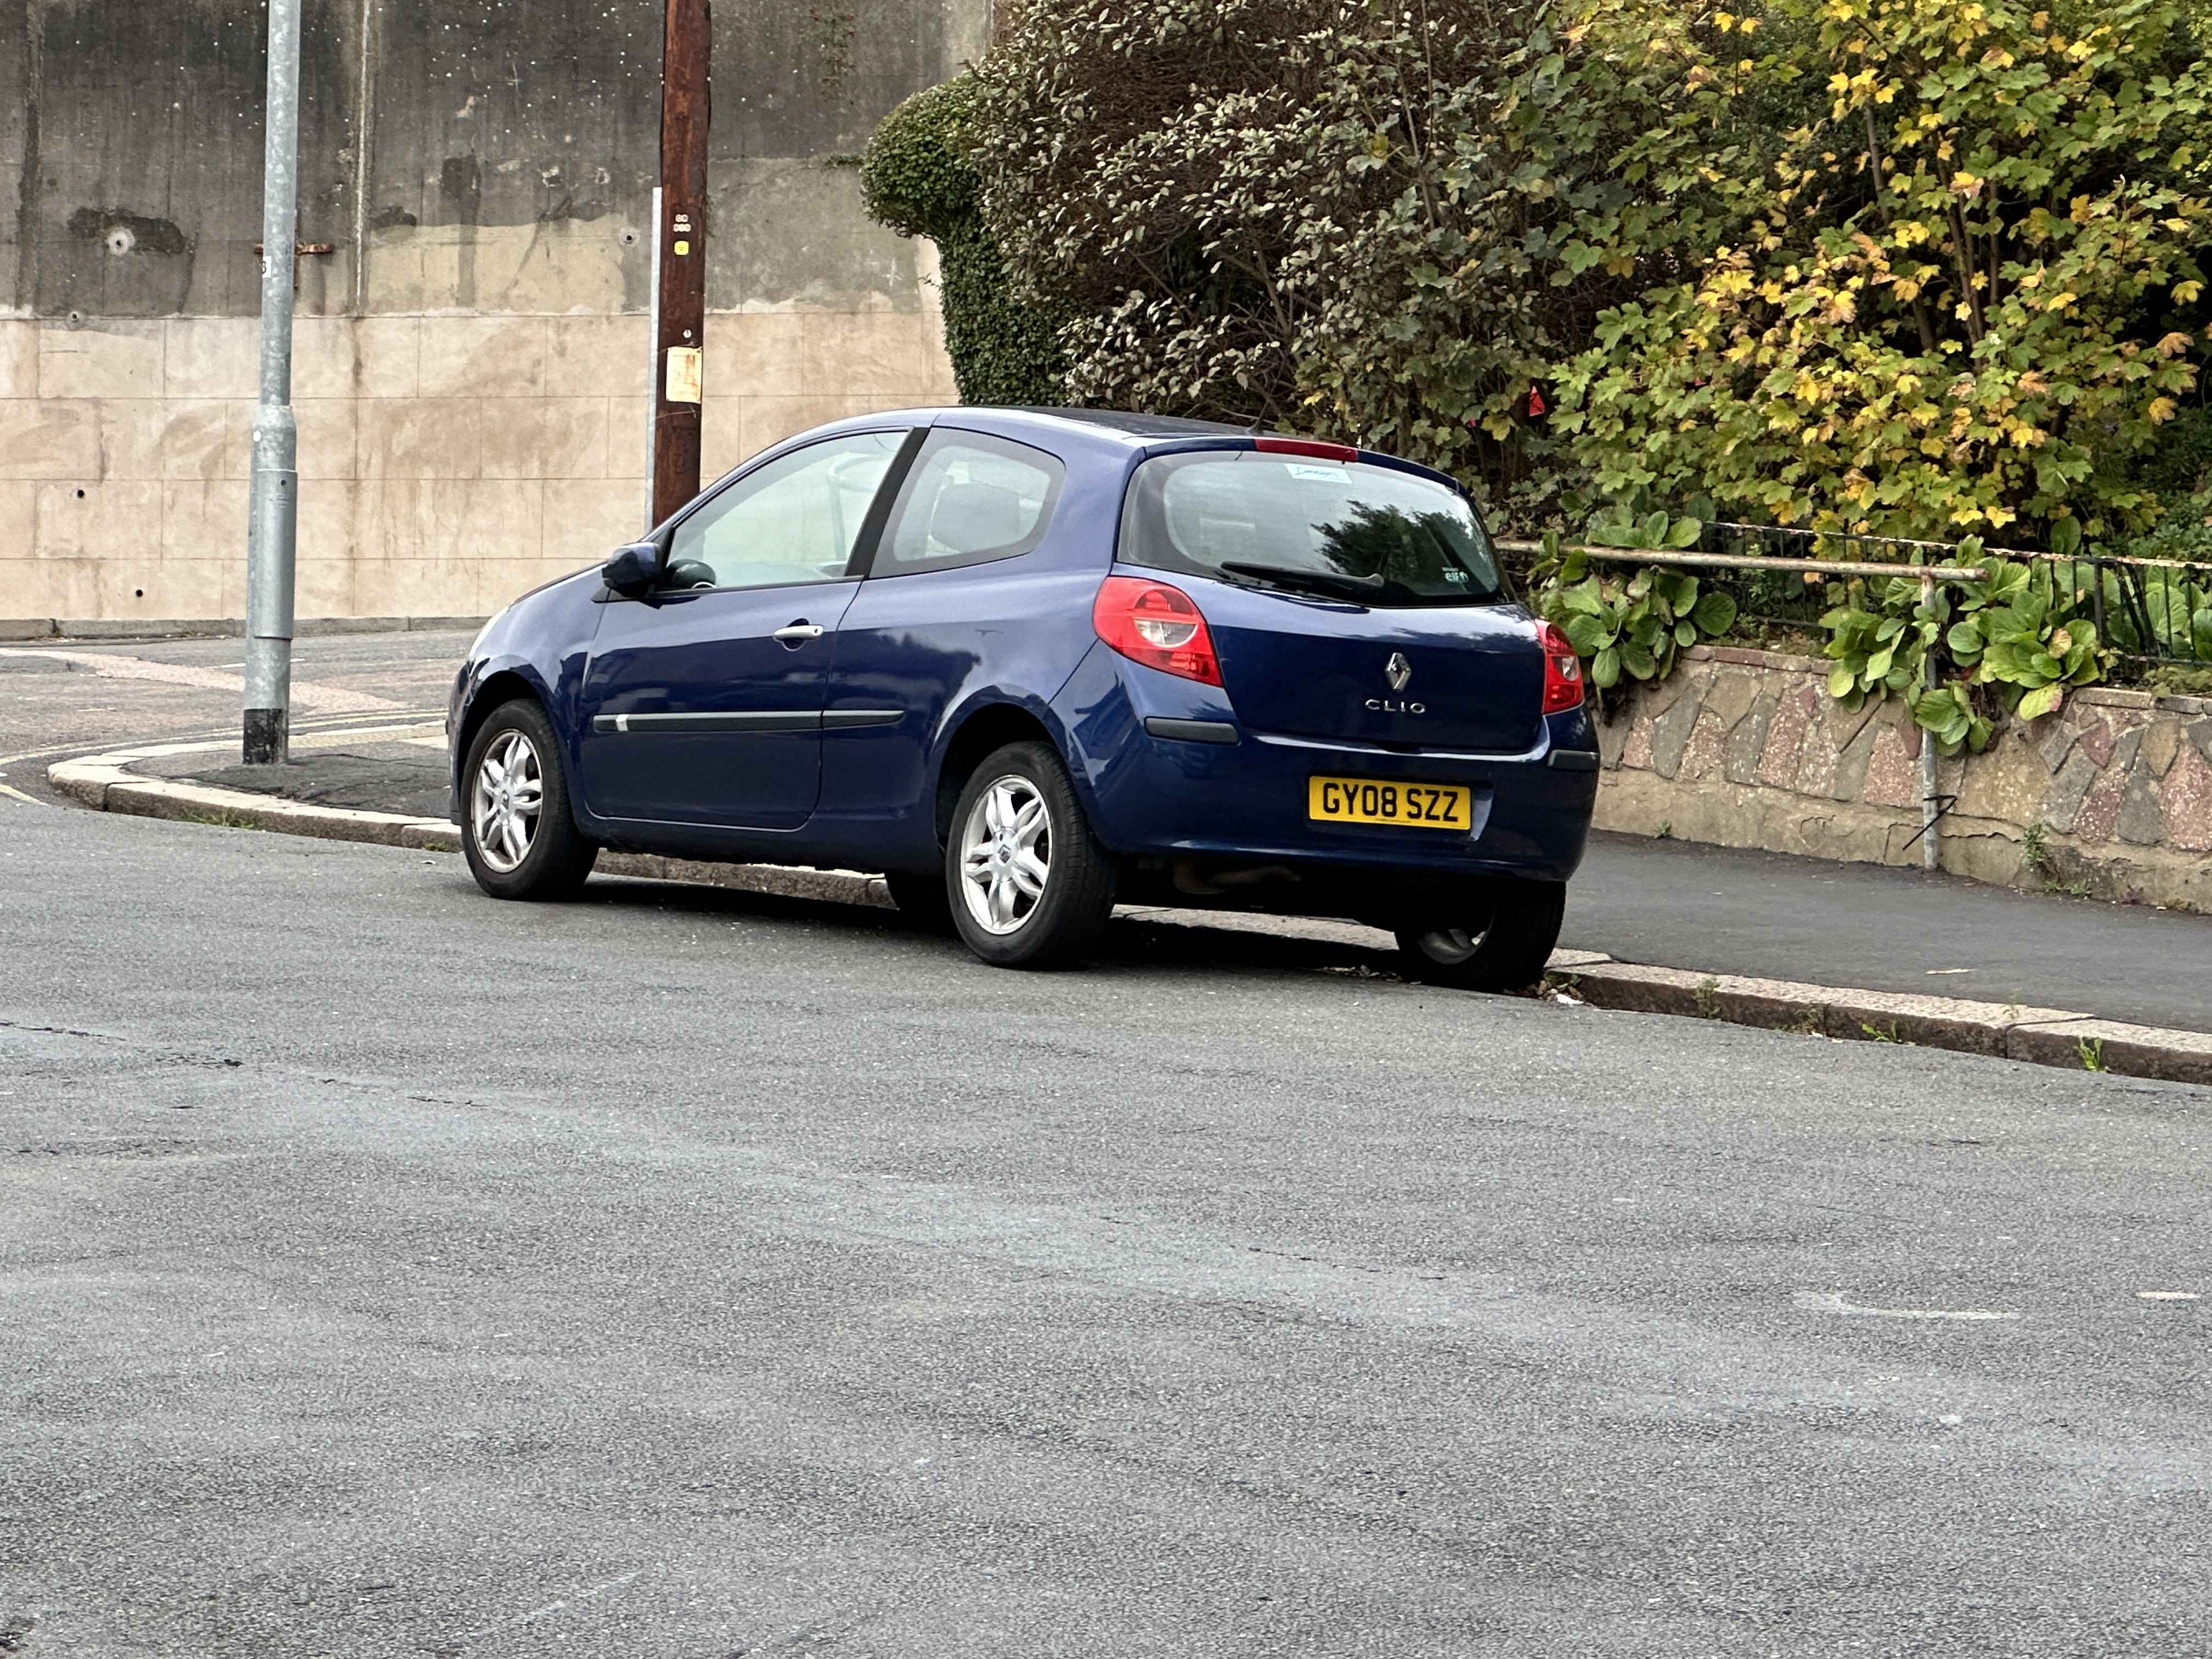 Photograph of GY08 SZZ - a Blue Renault Clio parked in Hollingdean by a non-resident. The second of two photographs supplied by the residents of Hollingdean.